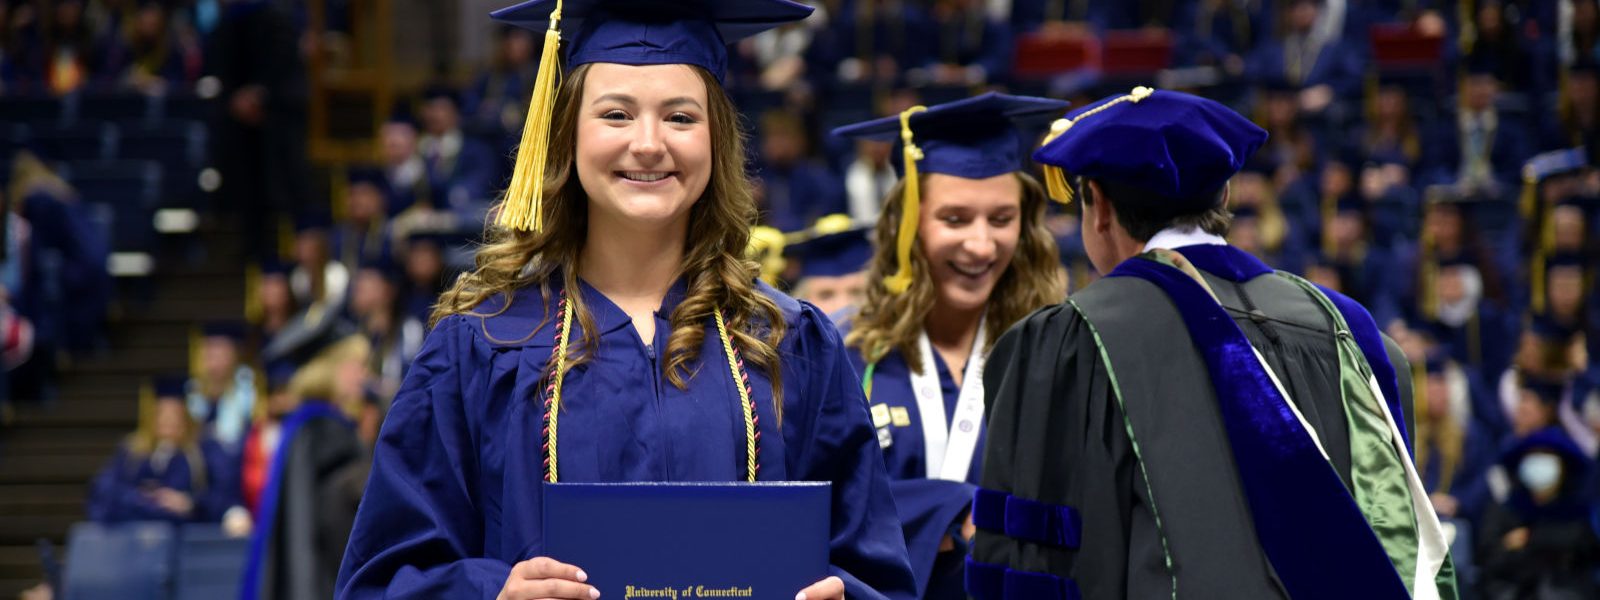 2022 College of Agriculture, Health and Natural Resources Commencement at Gampel Pavilion. May 7, 2022. (Dalton Scott/UConn Photo)